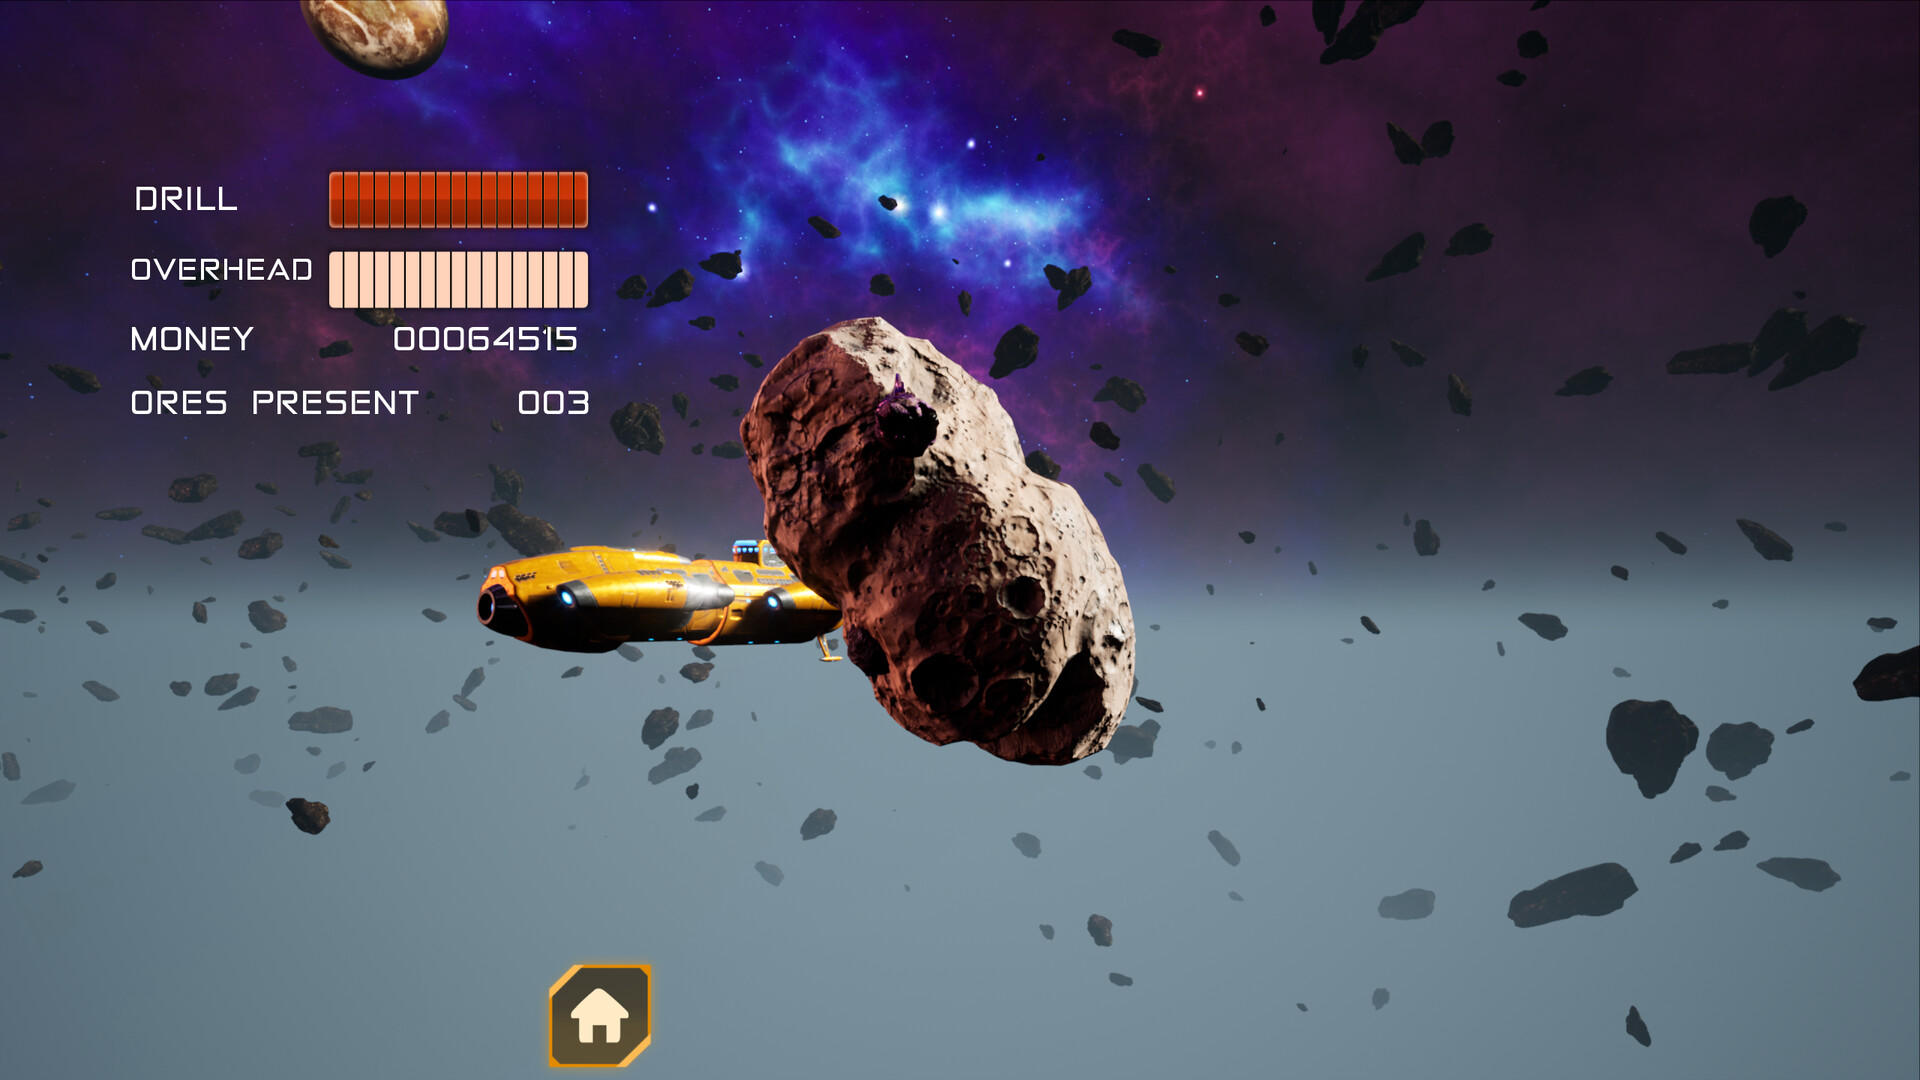 SPACE MINING COMPANY on Steam